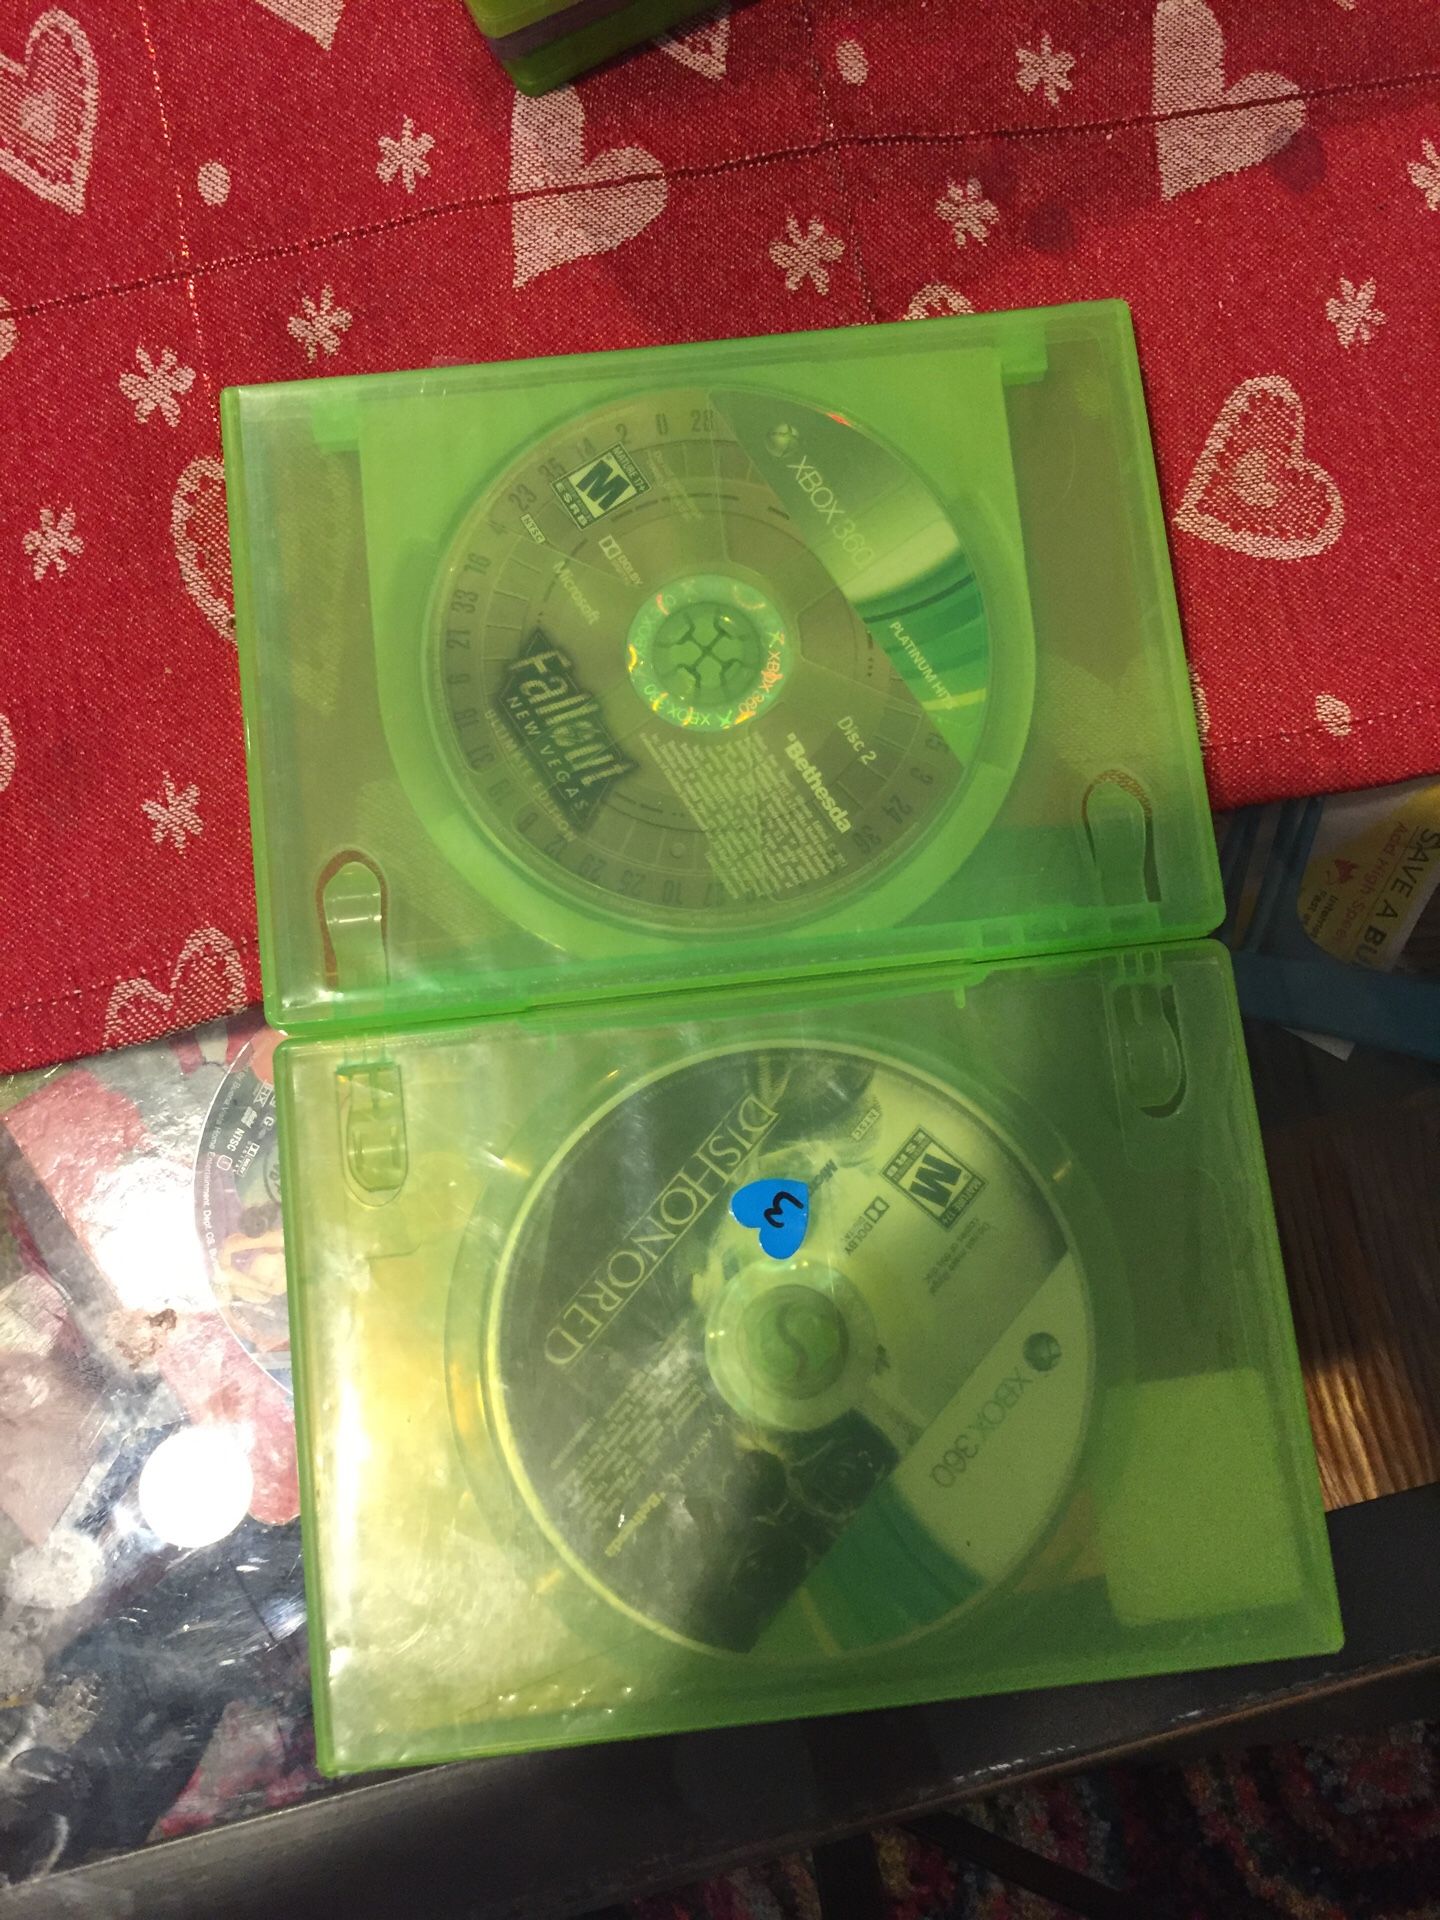 2 Xbox 360 games for 5 dollars